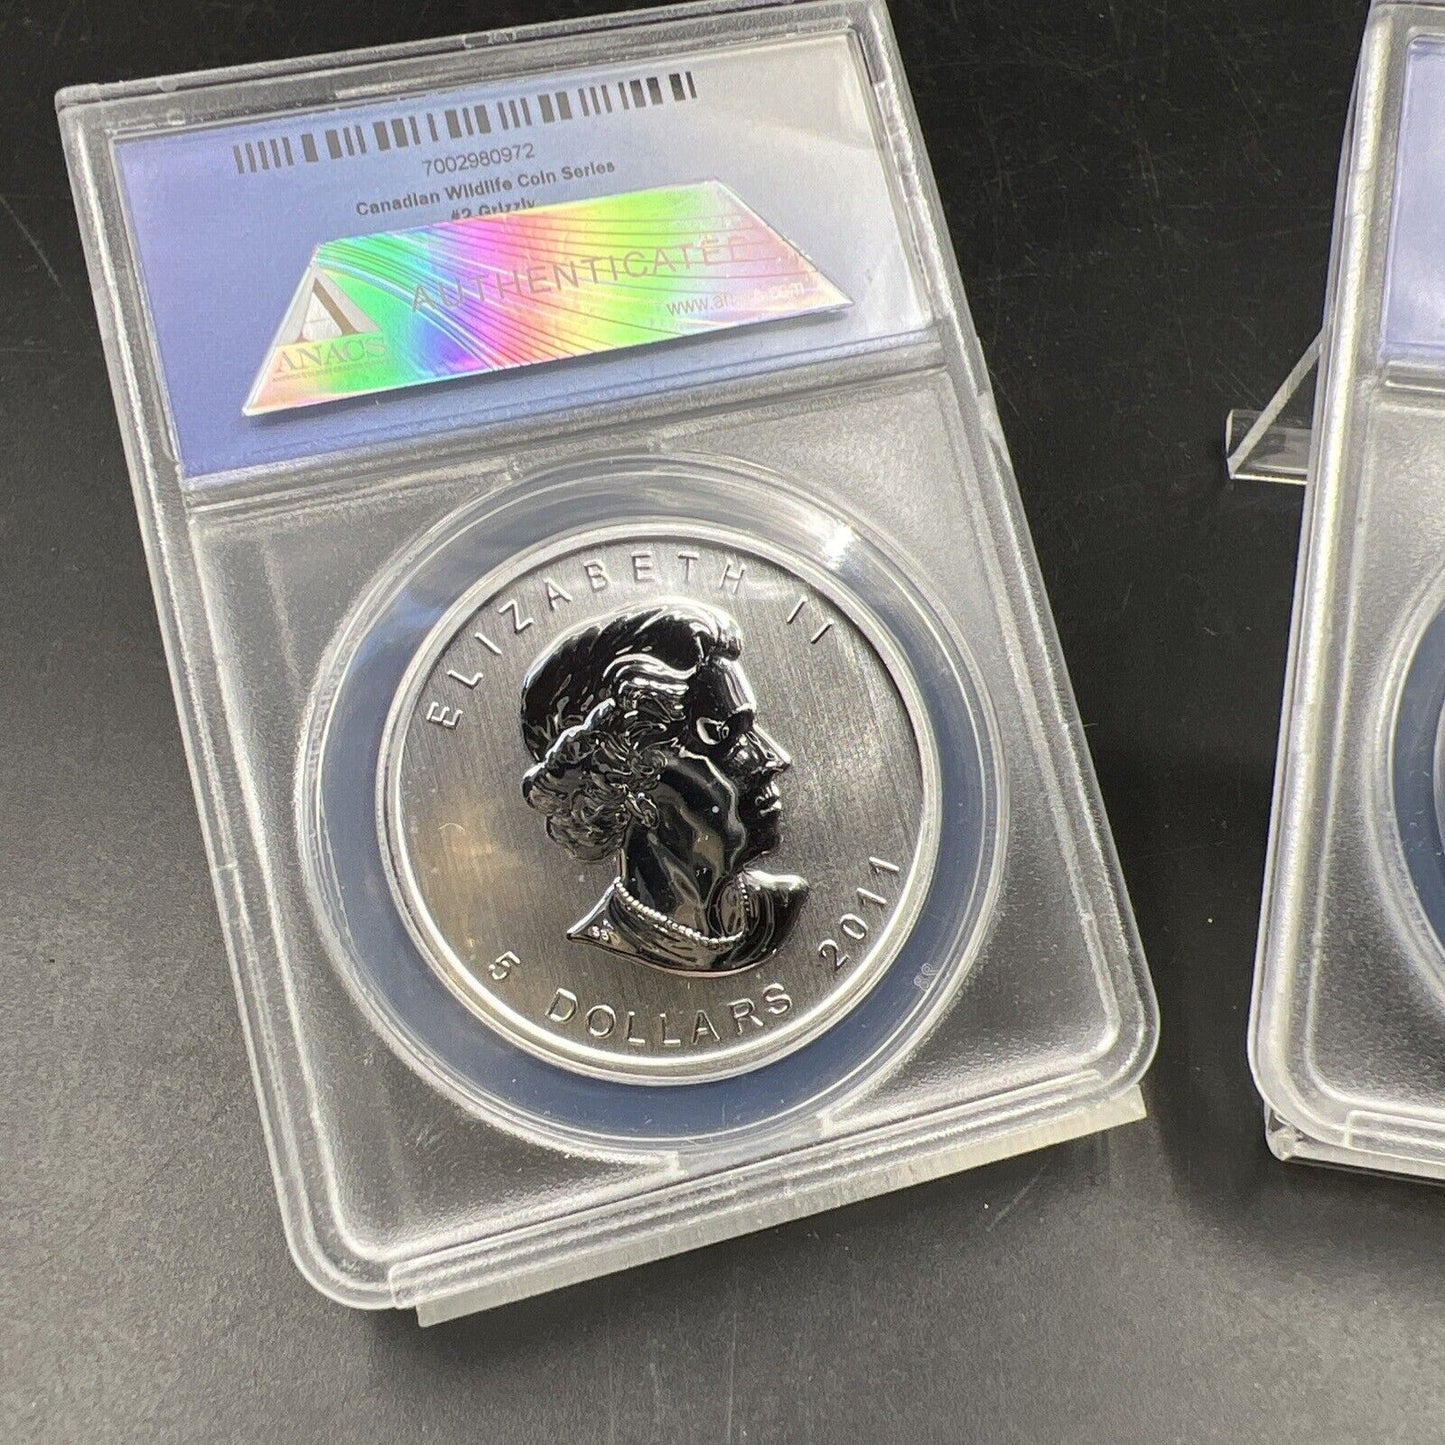 2 Consecutive Serial Number ANACS MS69 2012 1 Oz Silver Wildlife Grizzly